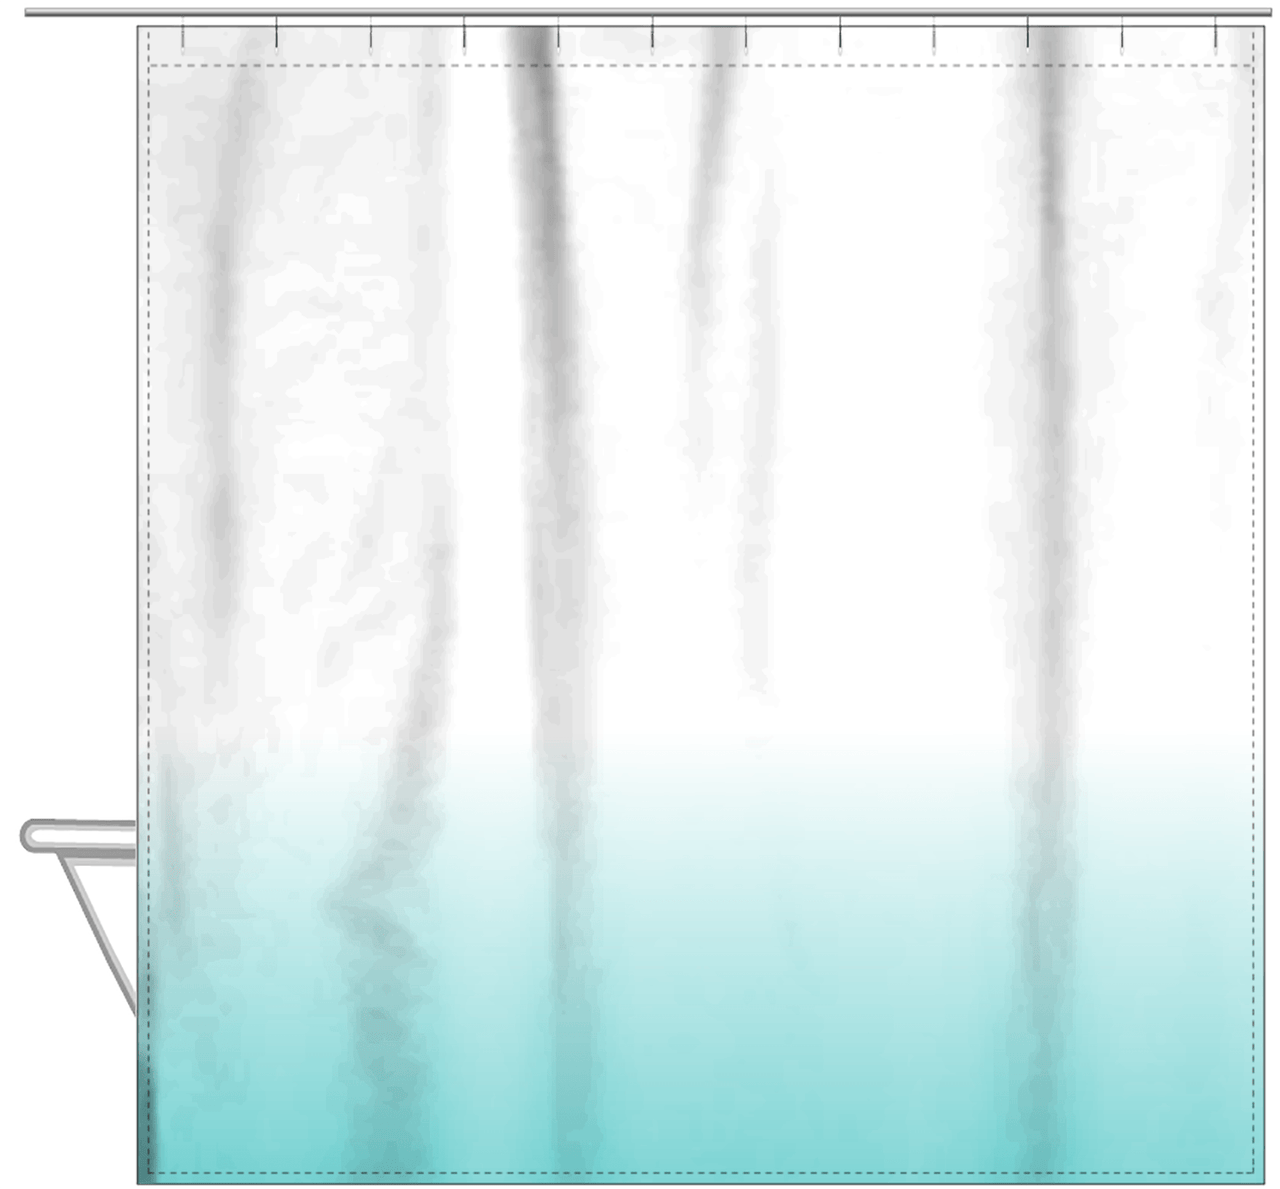 Personalized Ombre Shower Curtain - Teal and White - No Default Text - Ombre III - Hanging View